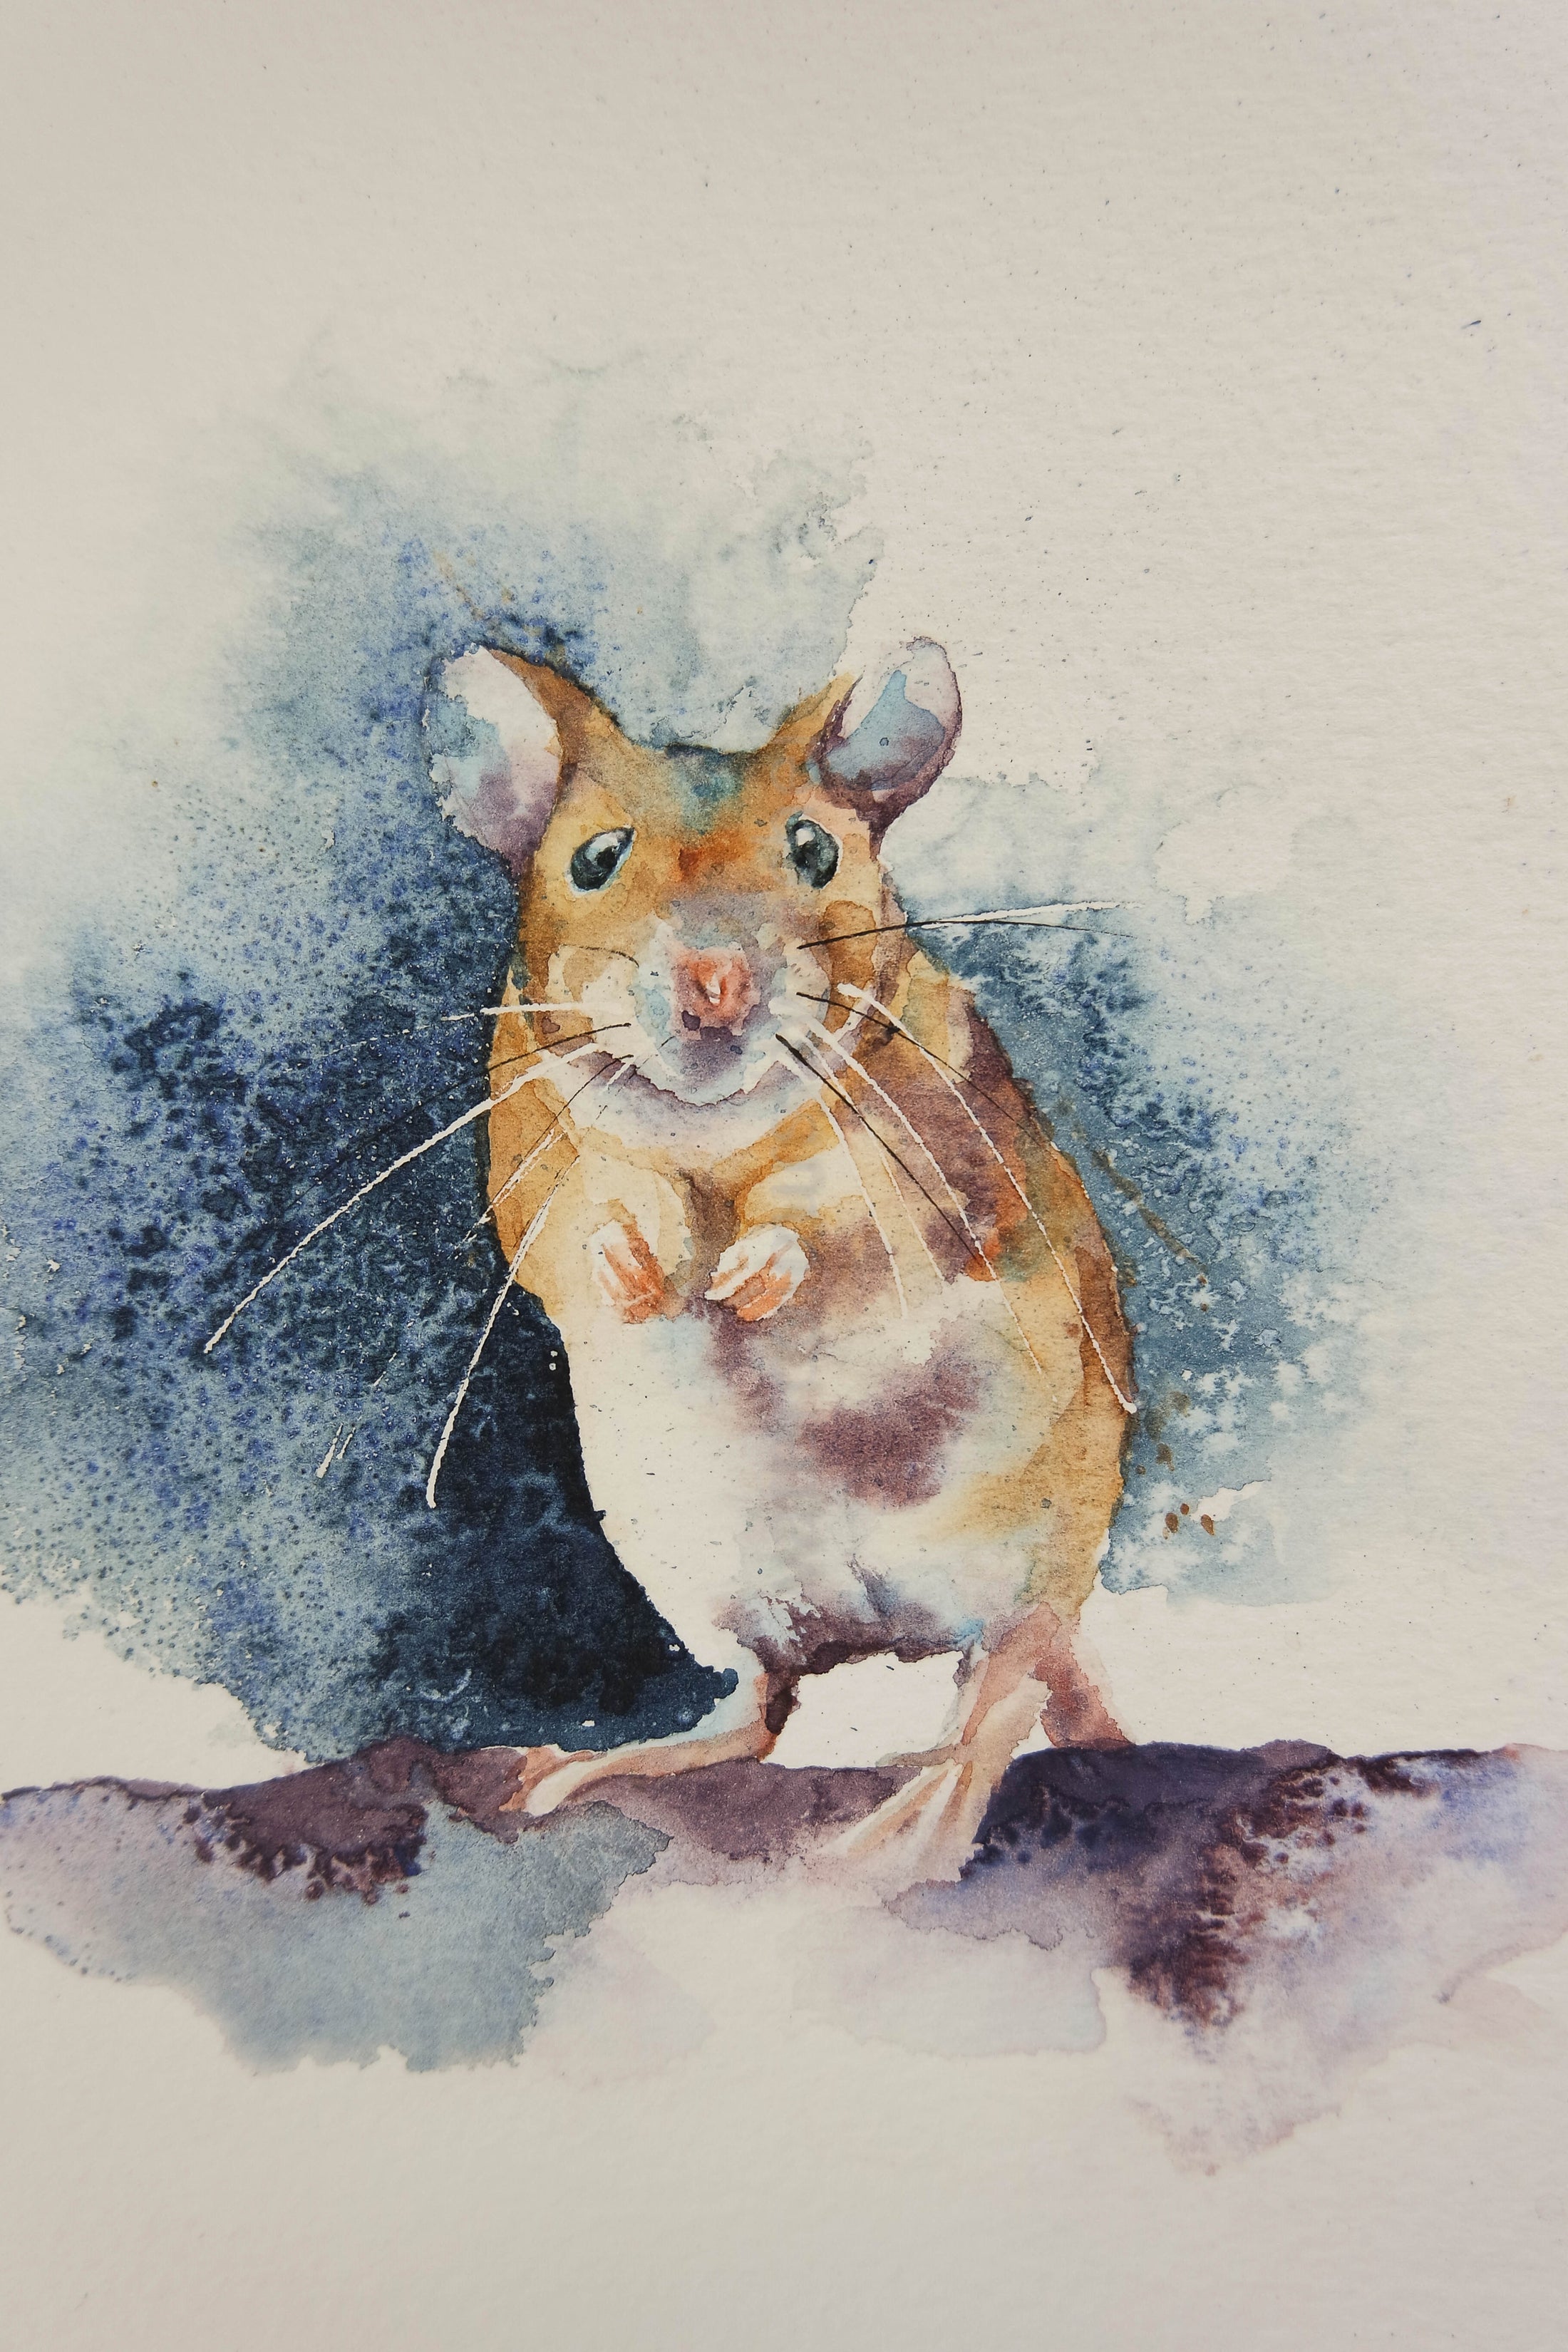 Painting a mouse – watercolours by rachel